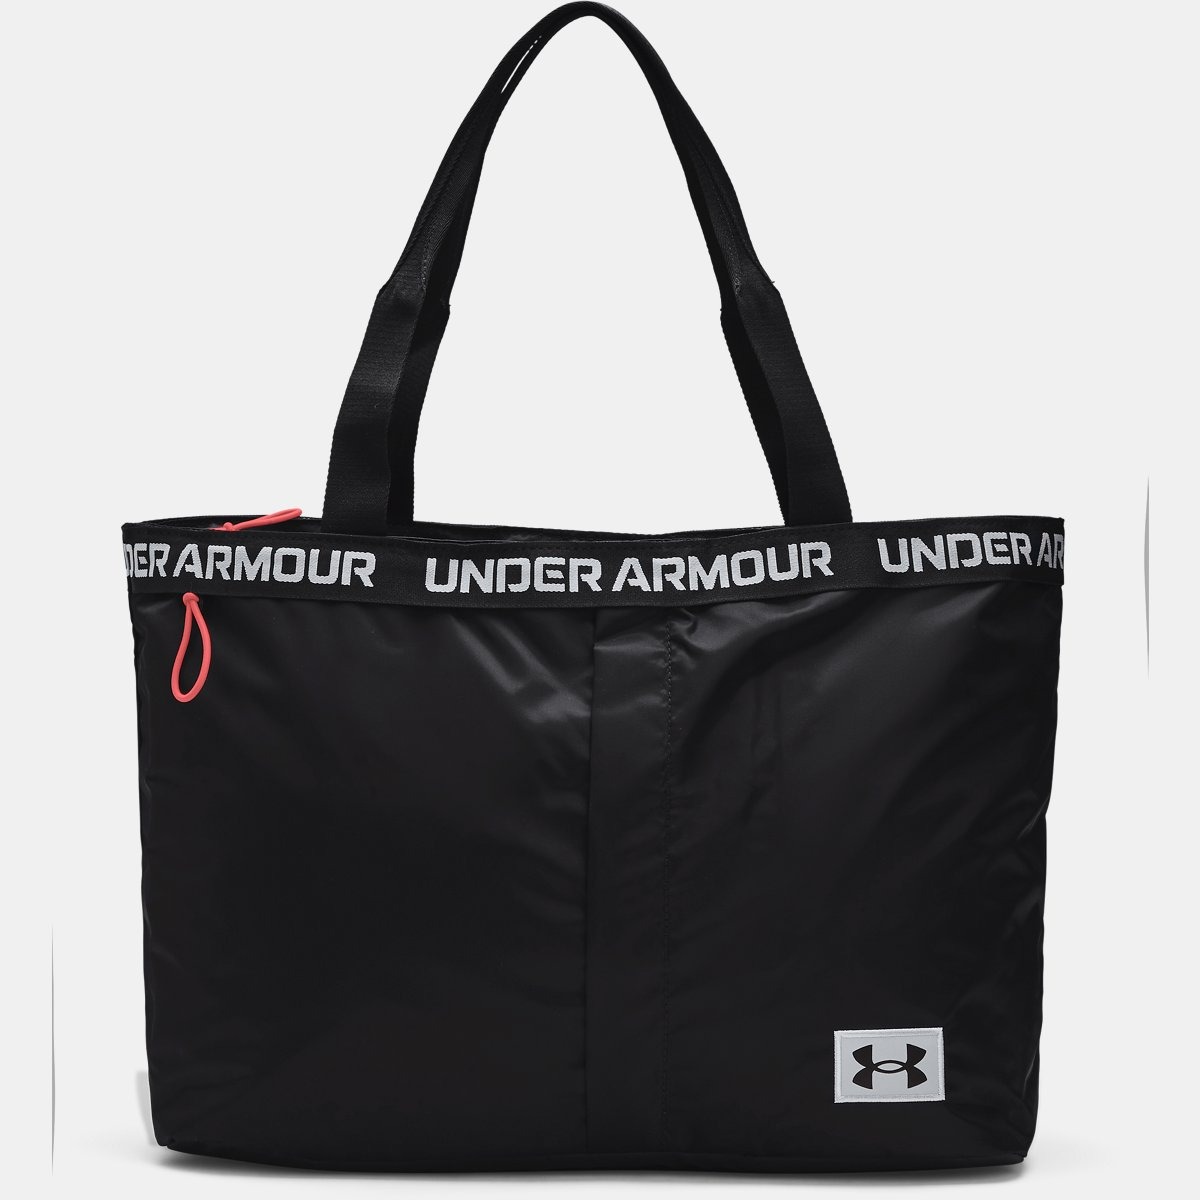 Womens Tote Bag in Black at Under Armour GOOFASH